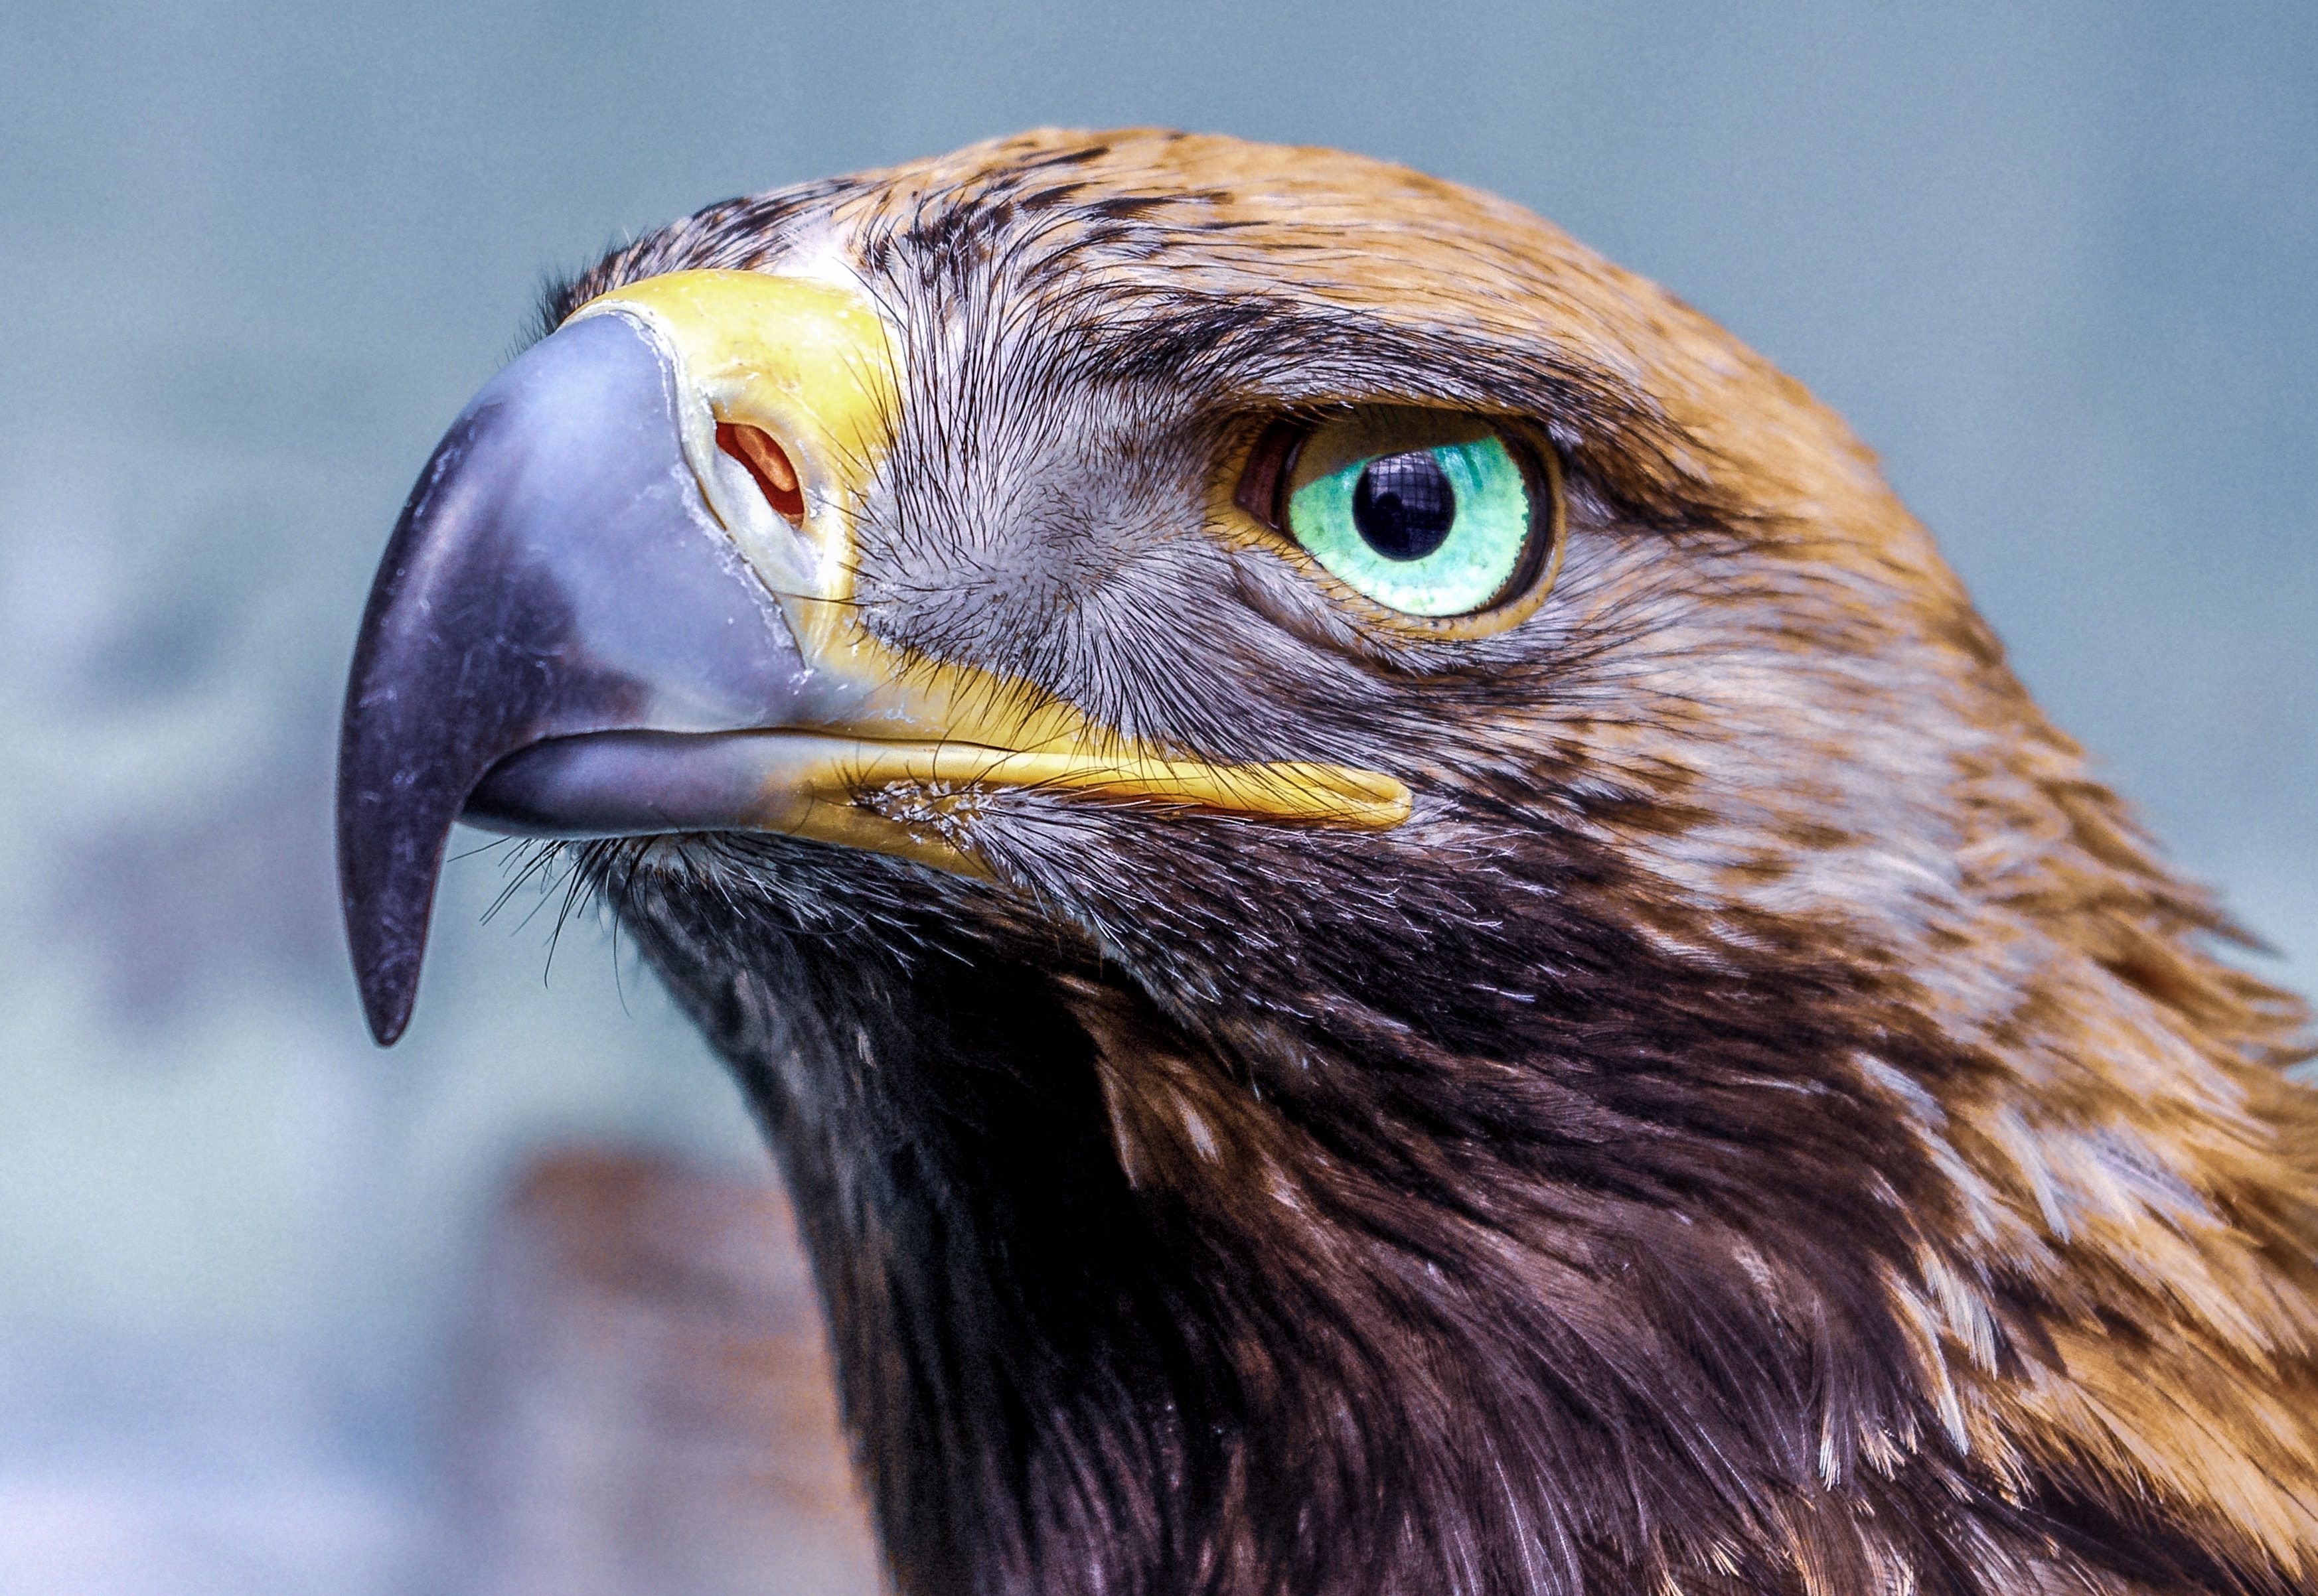 Head of an eagle with green eyes